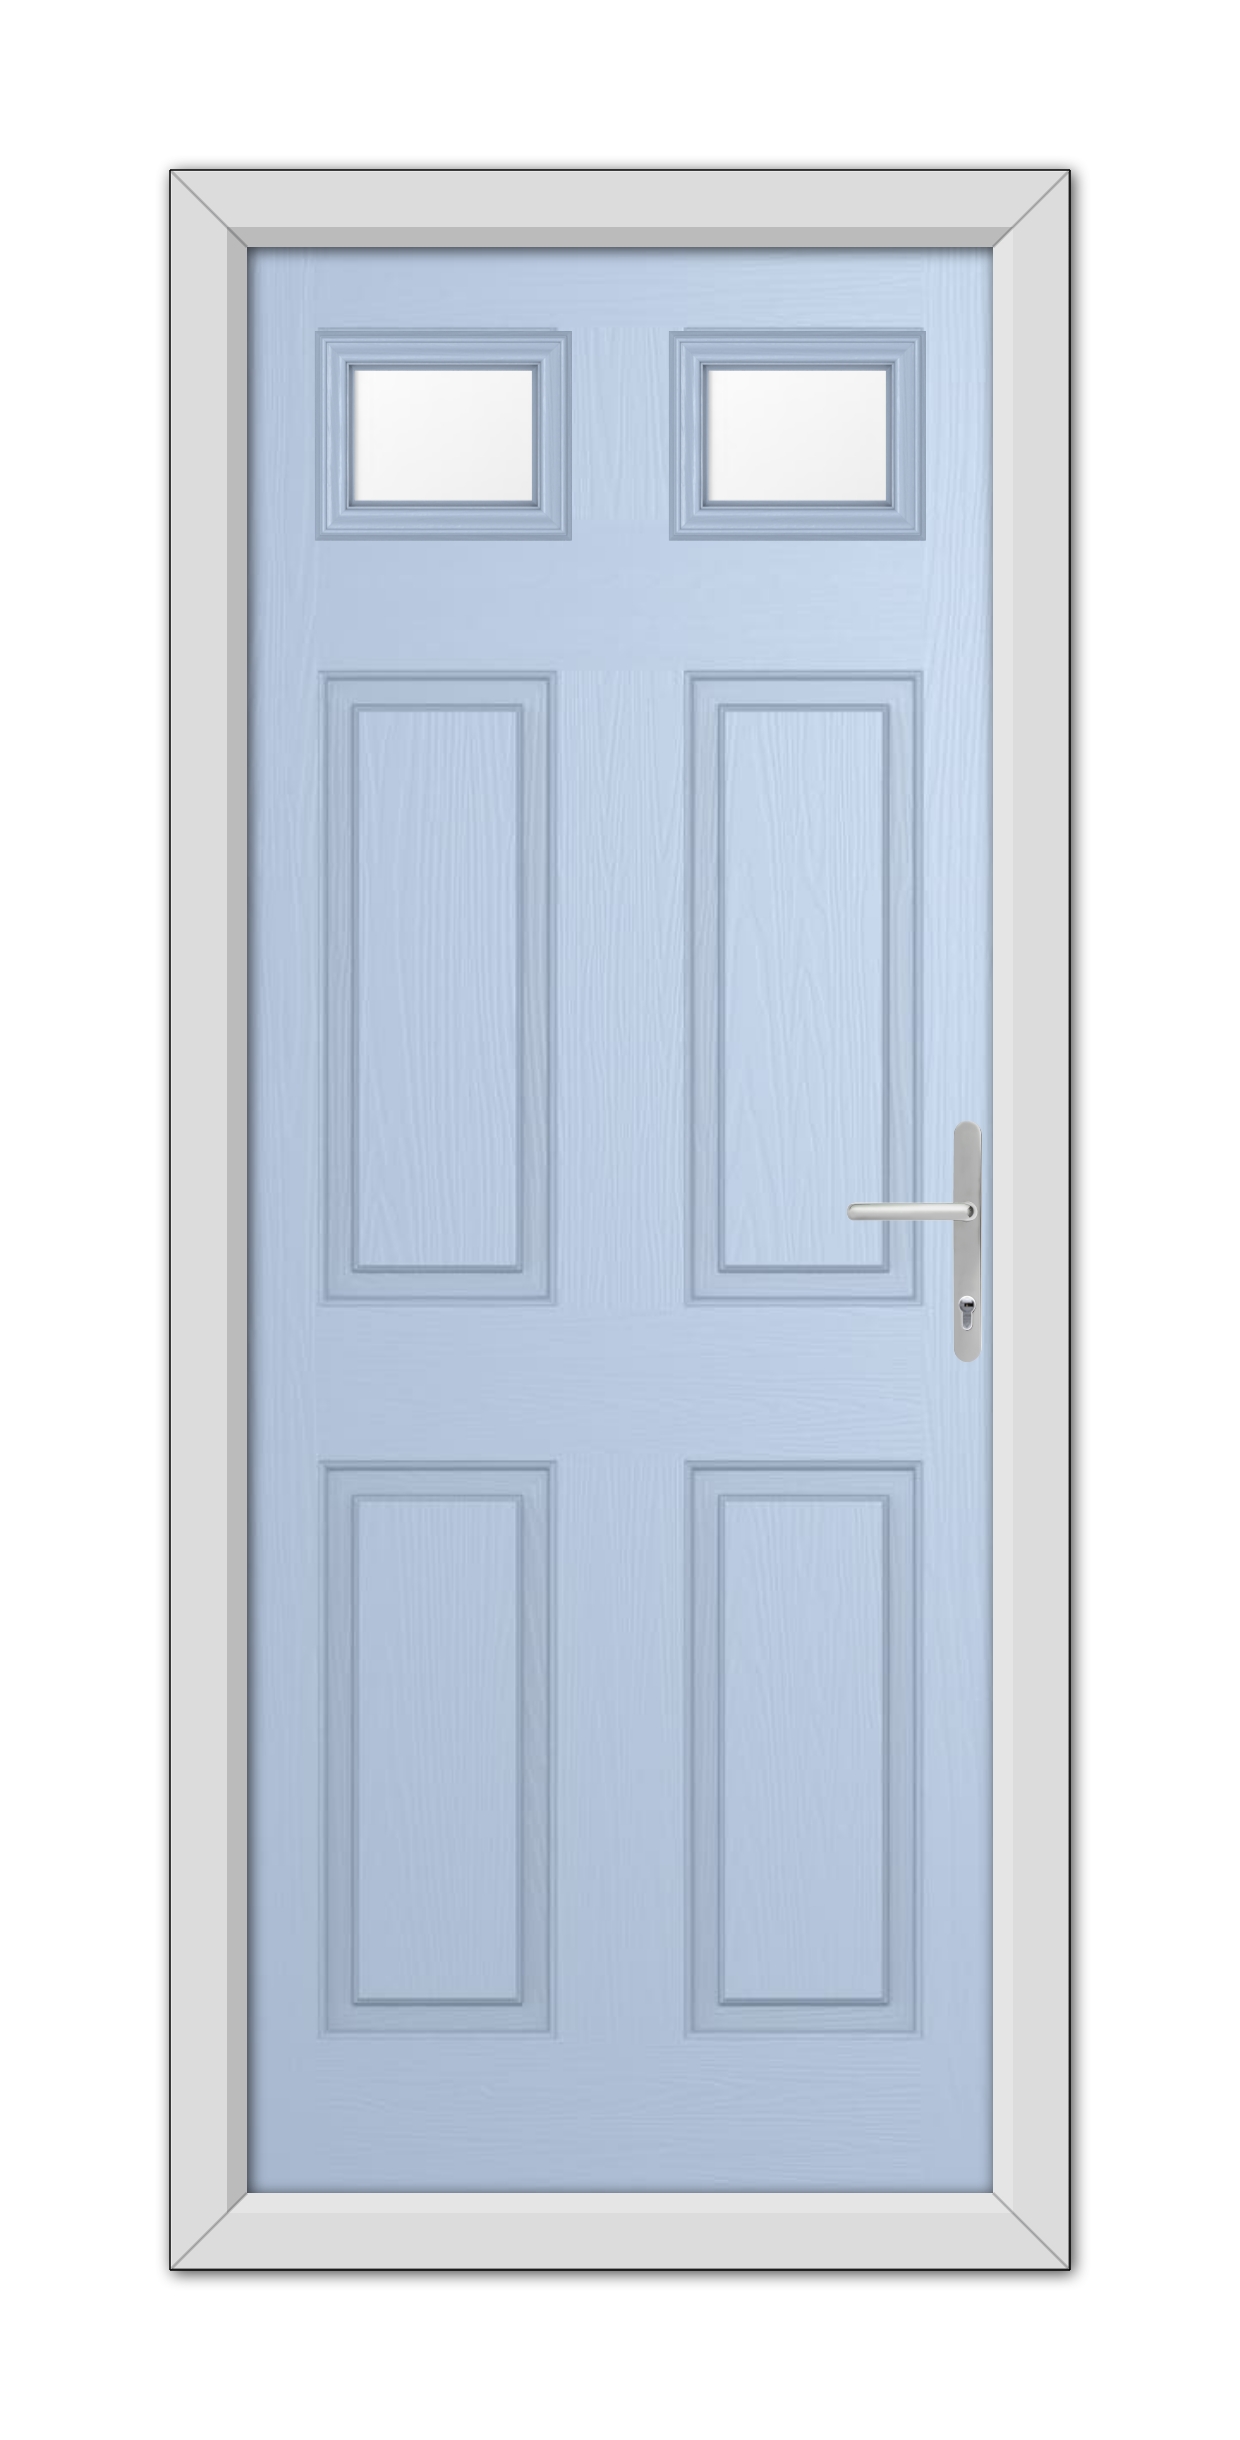 A Duck Egg Blue Middleton Glazed 2 Composite Door featuring six panels and three small square windows at the top, complete with a metal handle on the right side.